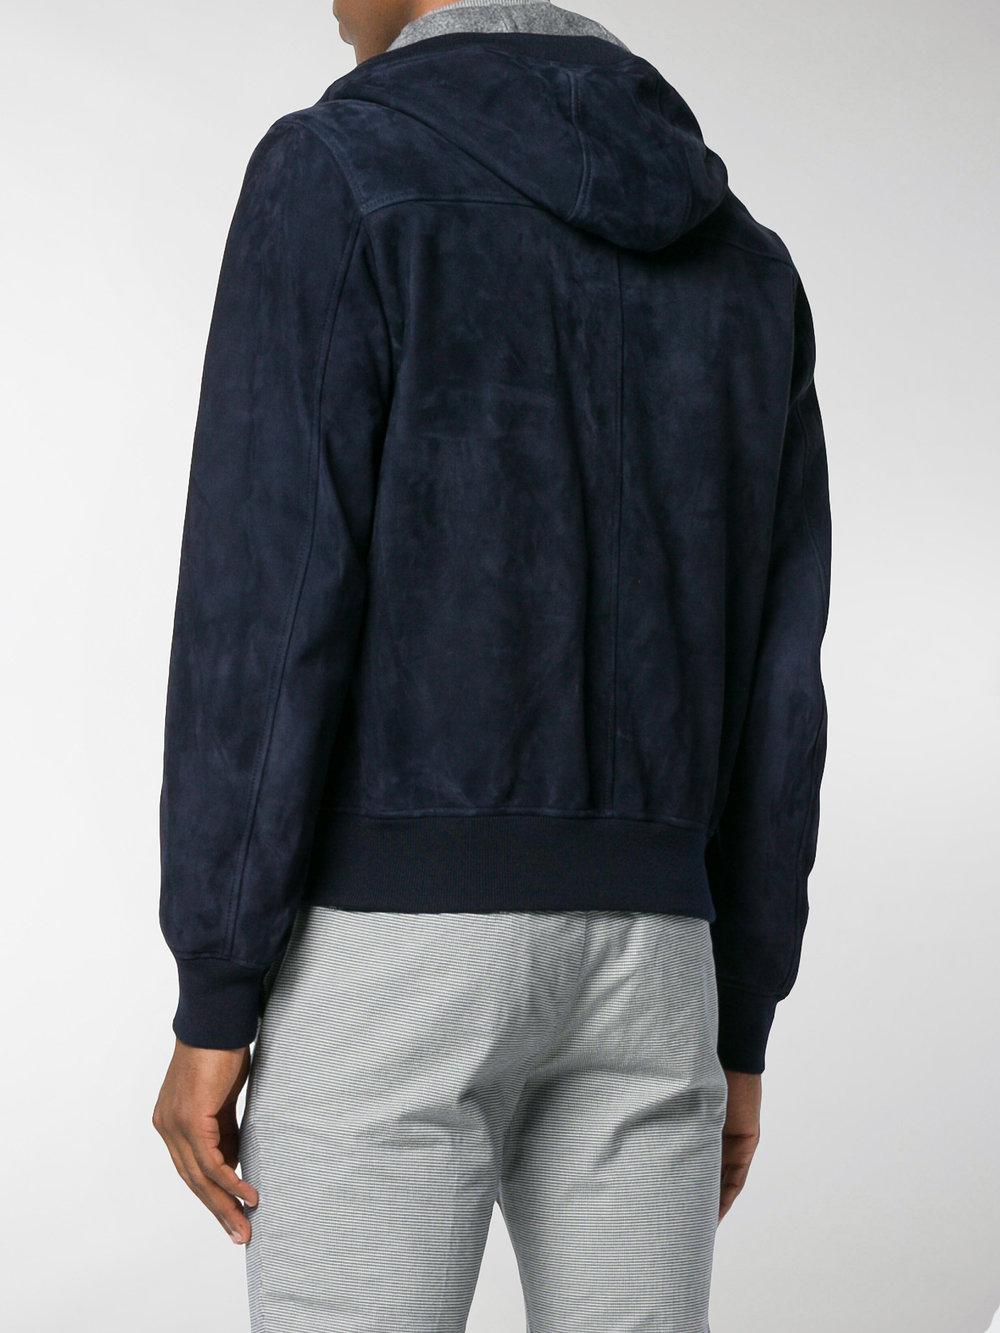 Herno Wool Hooded Bomber Jacket in Blue for Men - Lyst